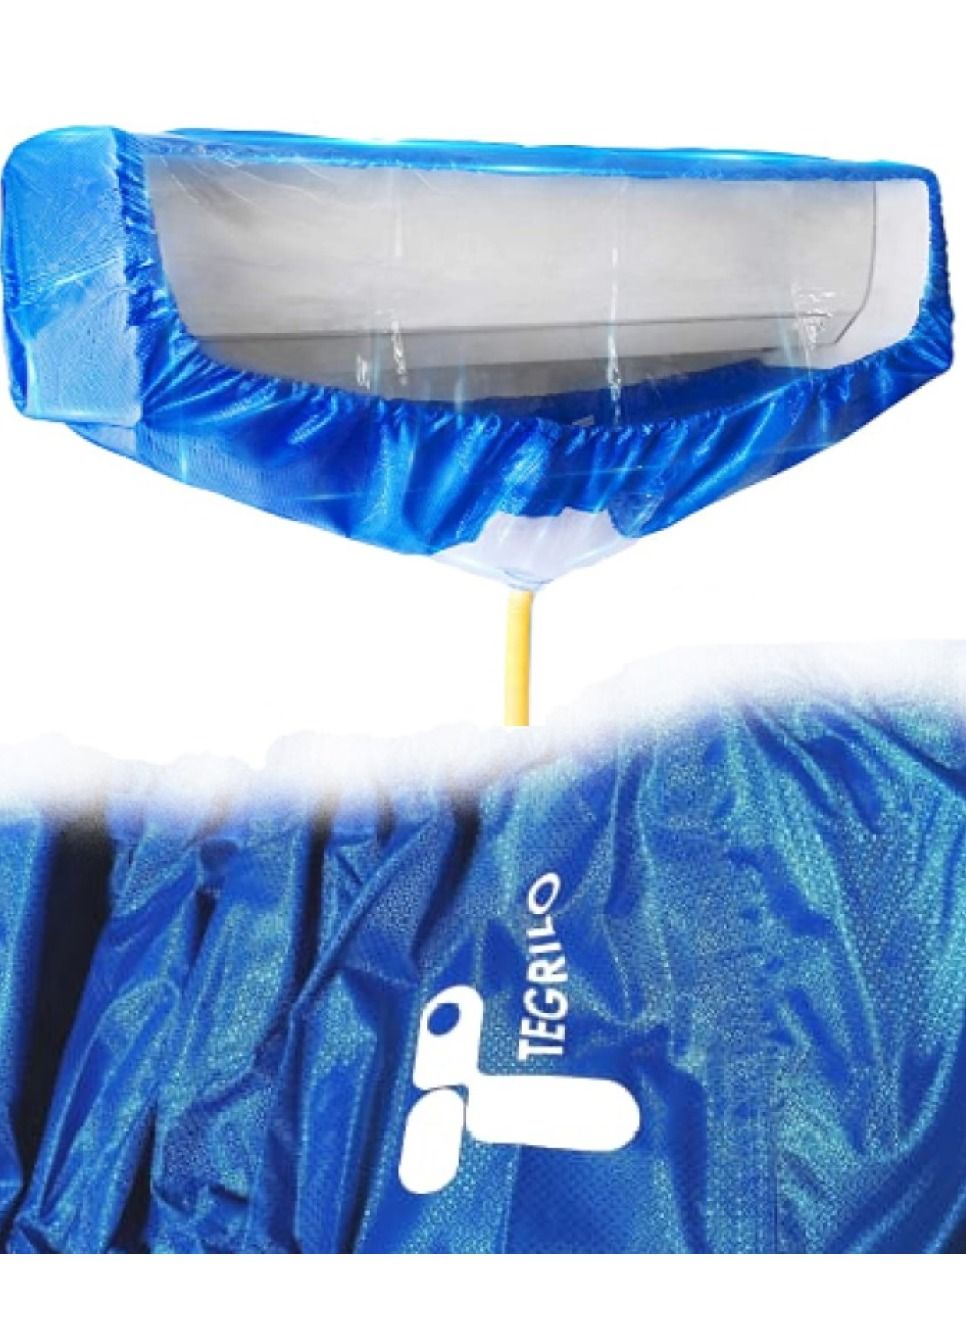 Split Air Conditioning Cleaning Bag - hvac shop